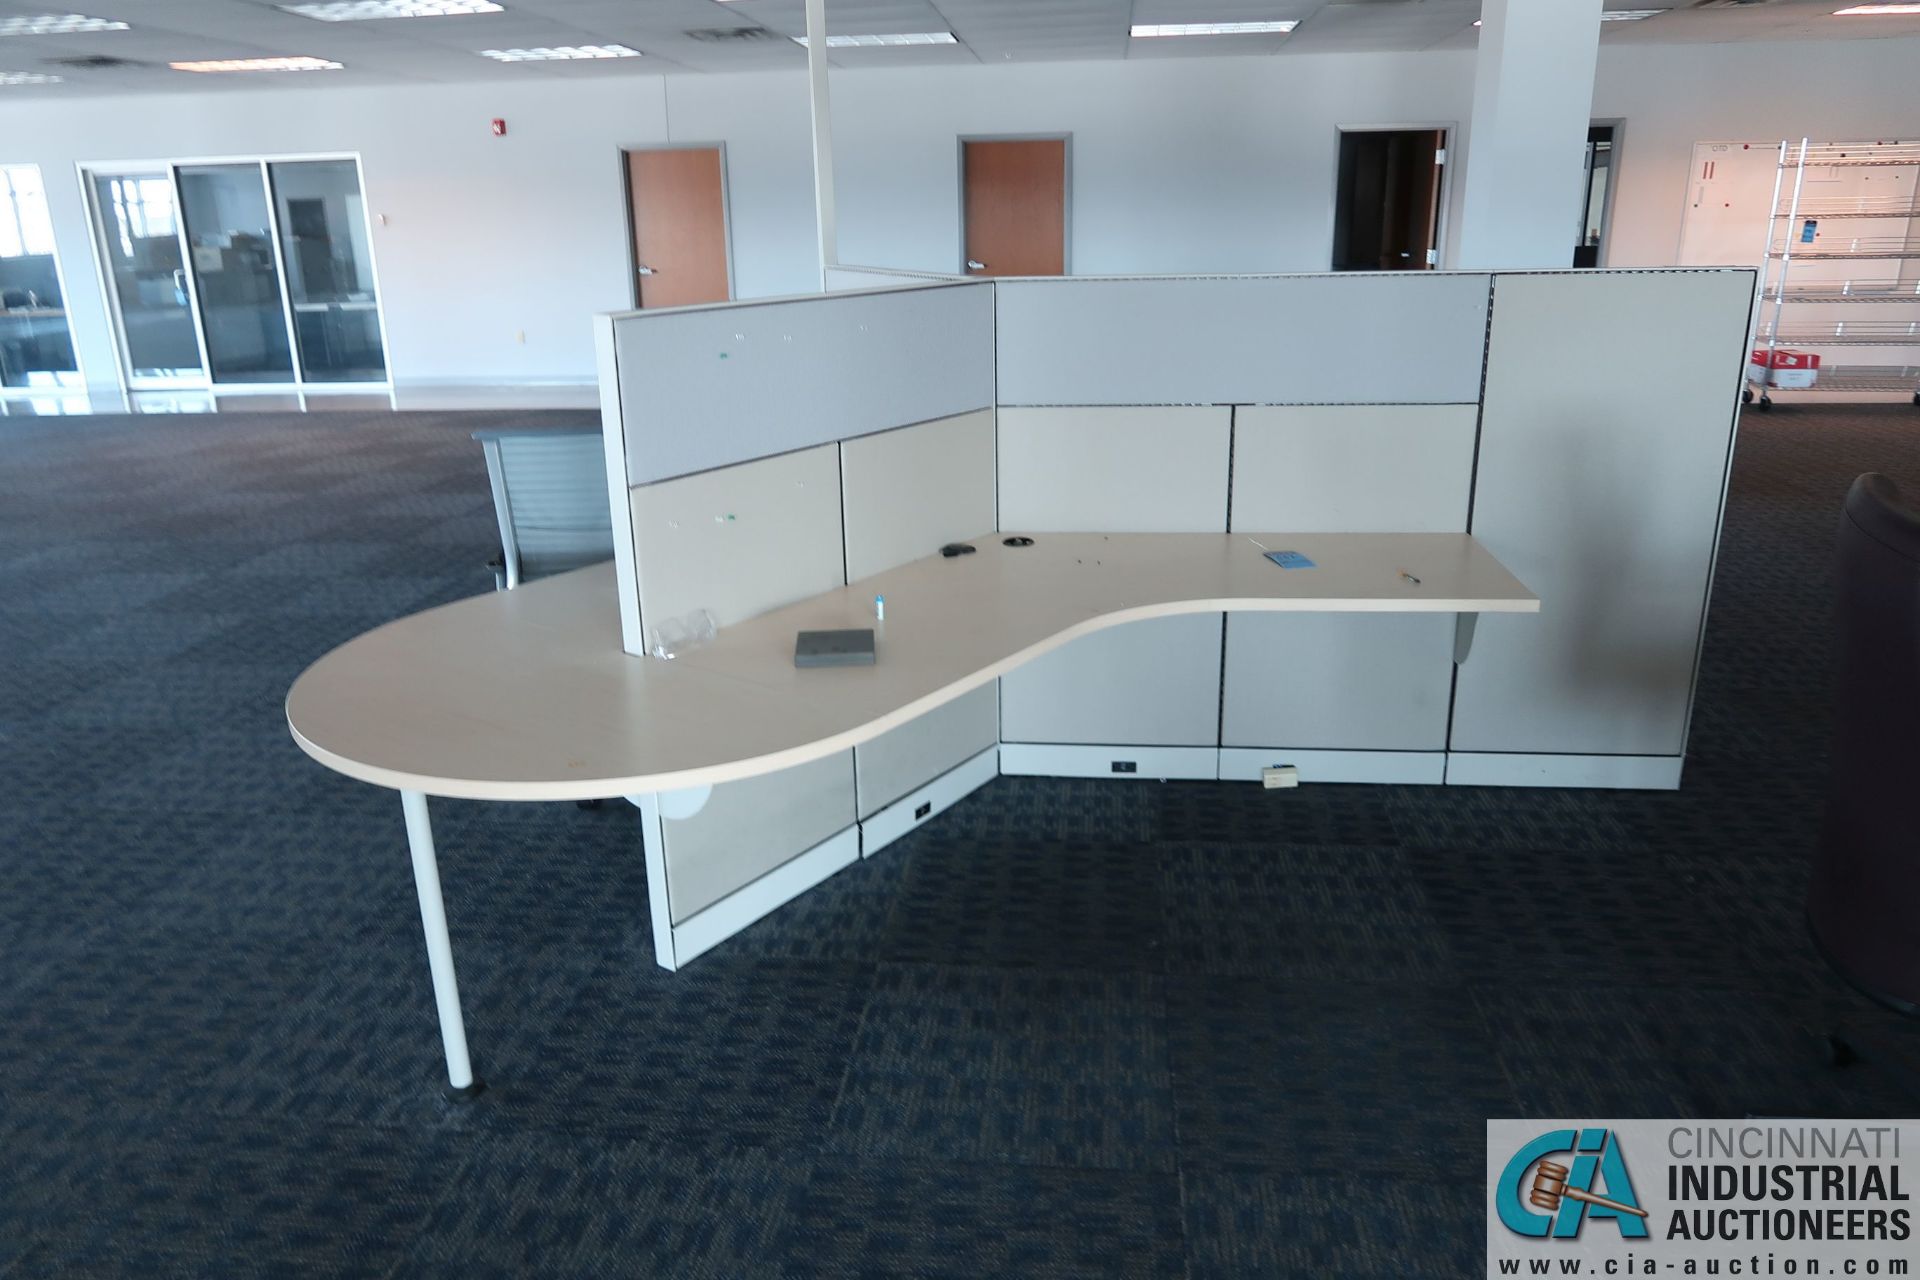 3-STATION MODULAR WORK STATION WITH (1) CHAIR, (2) PARTITION PANELS, (2) LATERAL FILE CABINETS